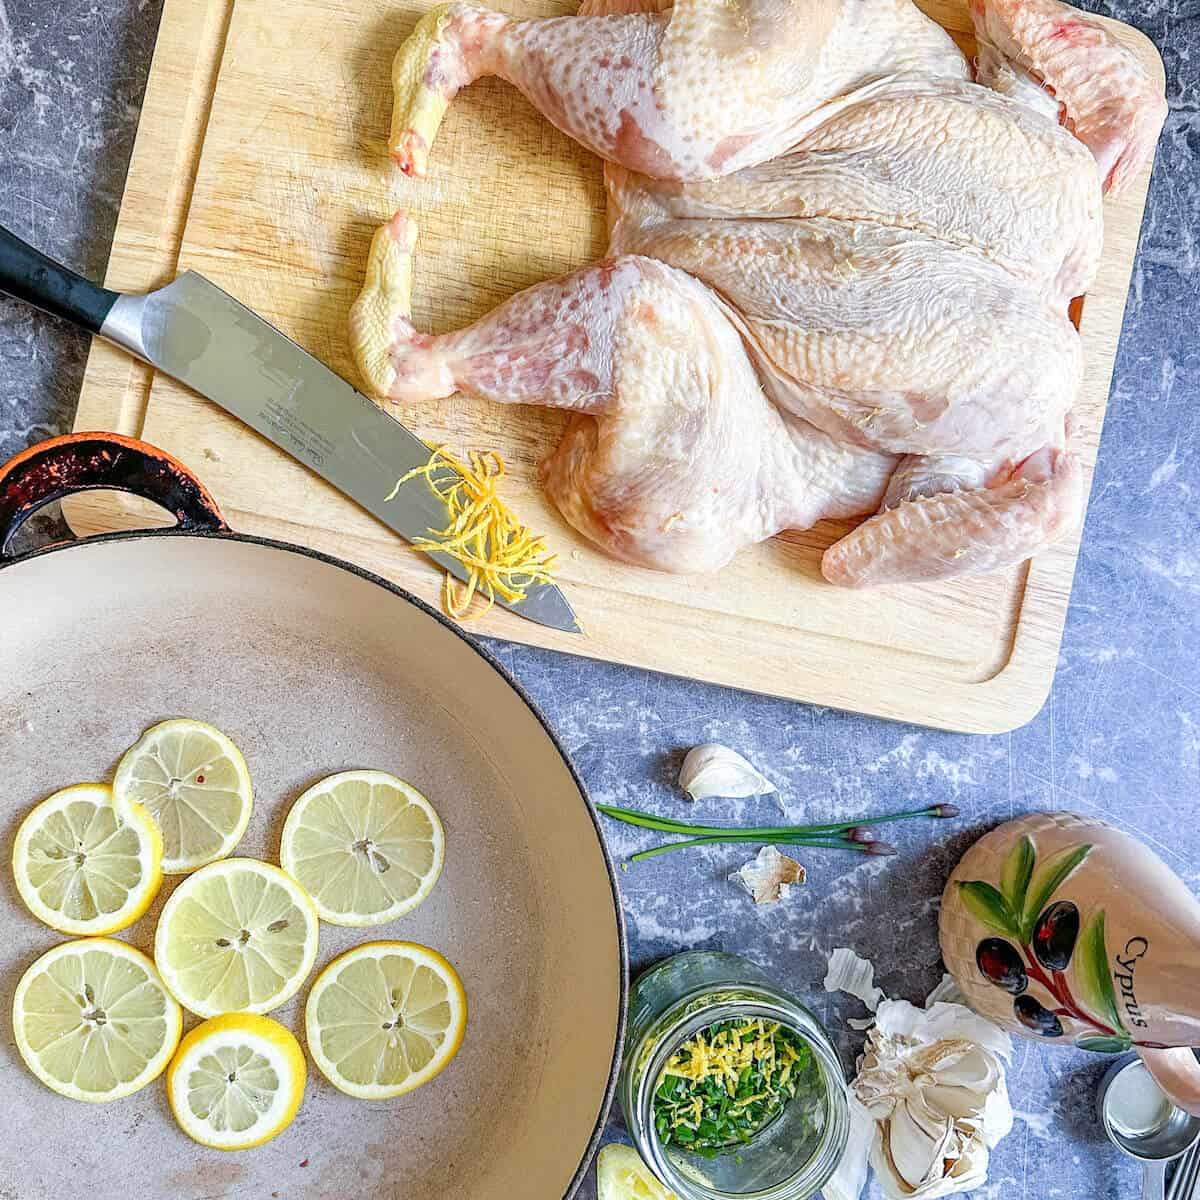 A shallow cast iron pan with slices of lemon in the base. Next to it, a raw spatchcock chicken is on a chopping board next to the other ingredients for the marinade. 